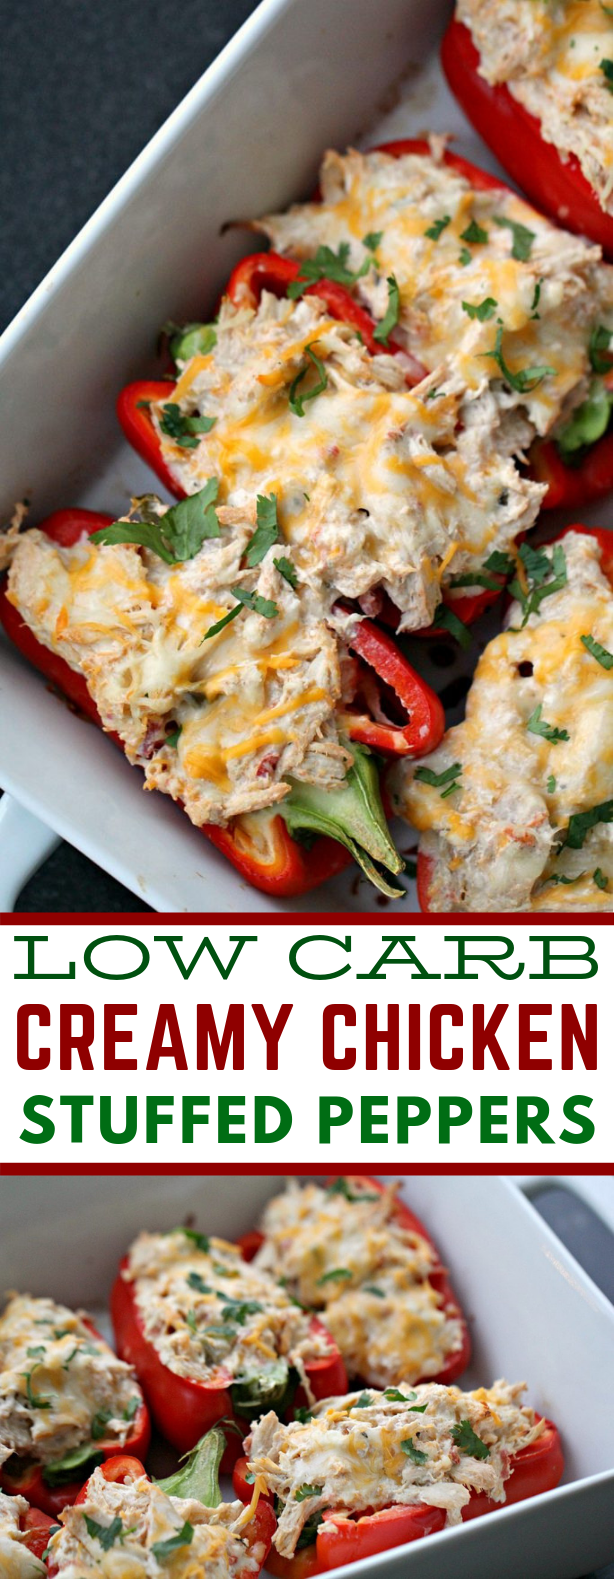 LOW-CARB CREAMY CHICKEN STUFFED PEPPERS #macrofriendly #lowcarbmeals